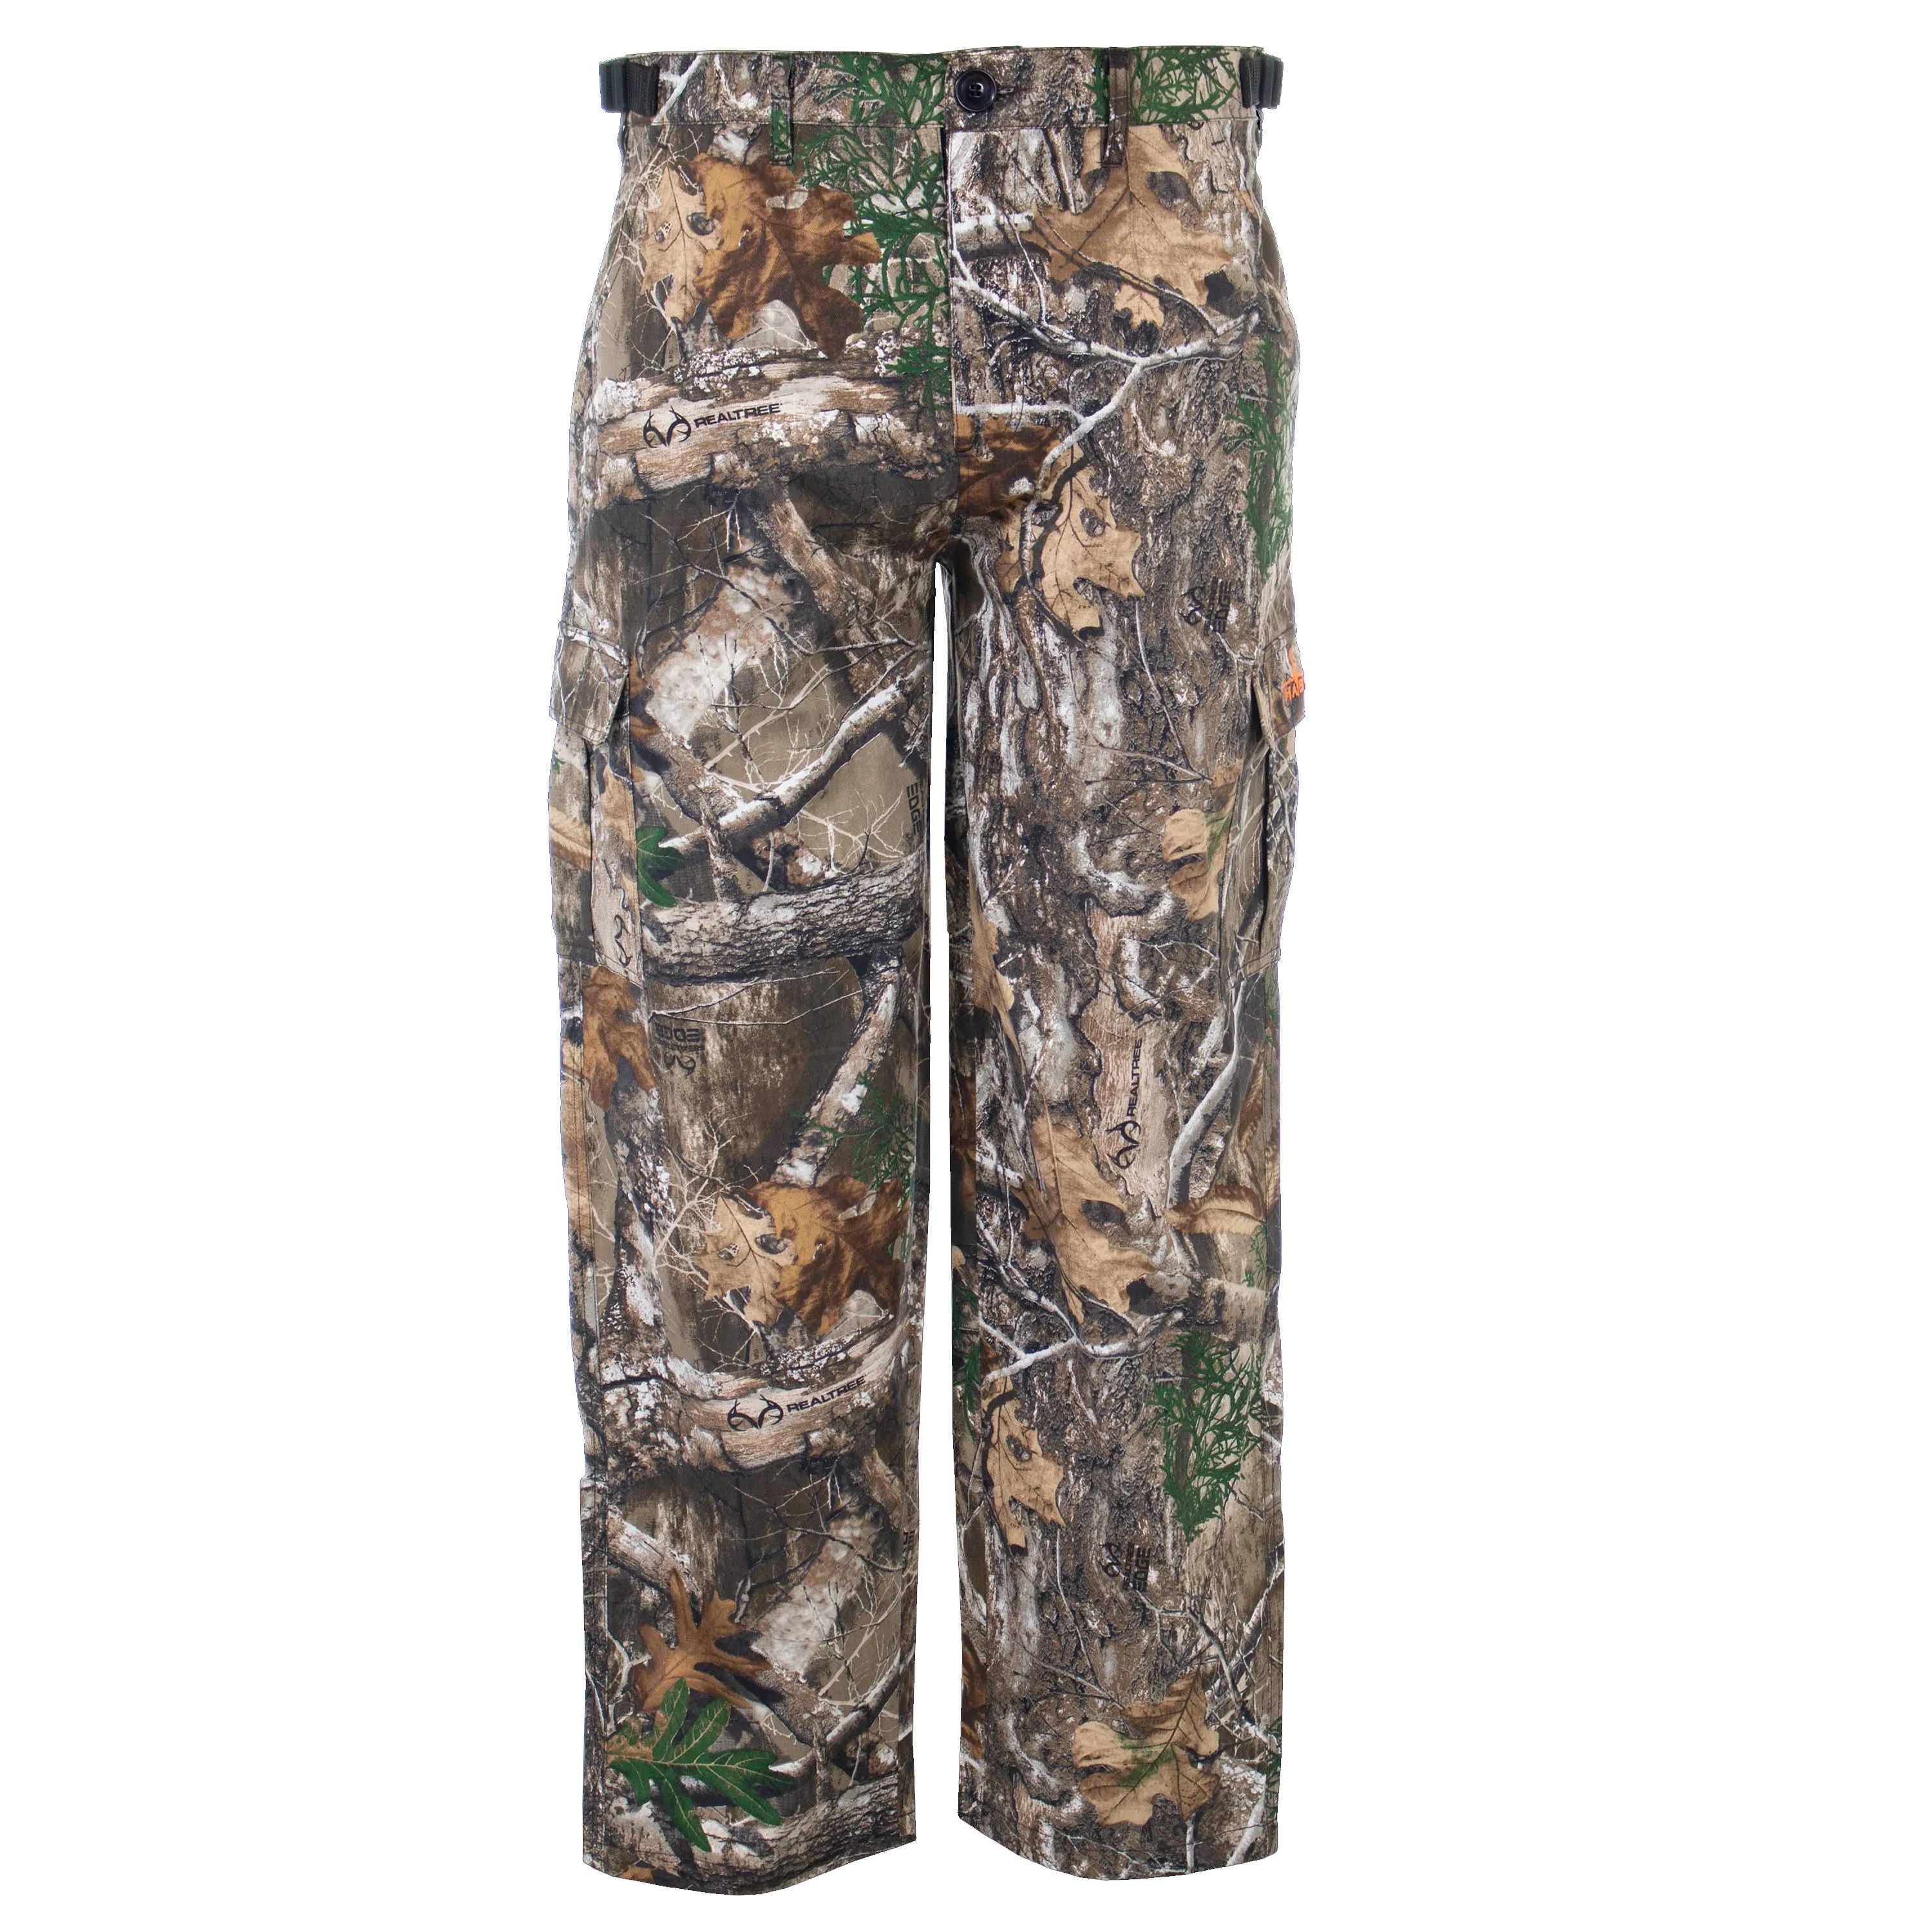 Comfortable Habit Hunting Pants with 6 Pockets and Loose Fit | Image